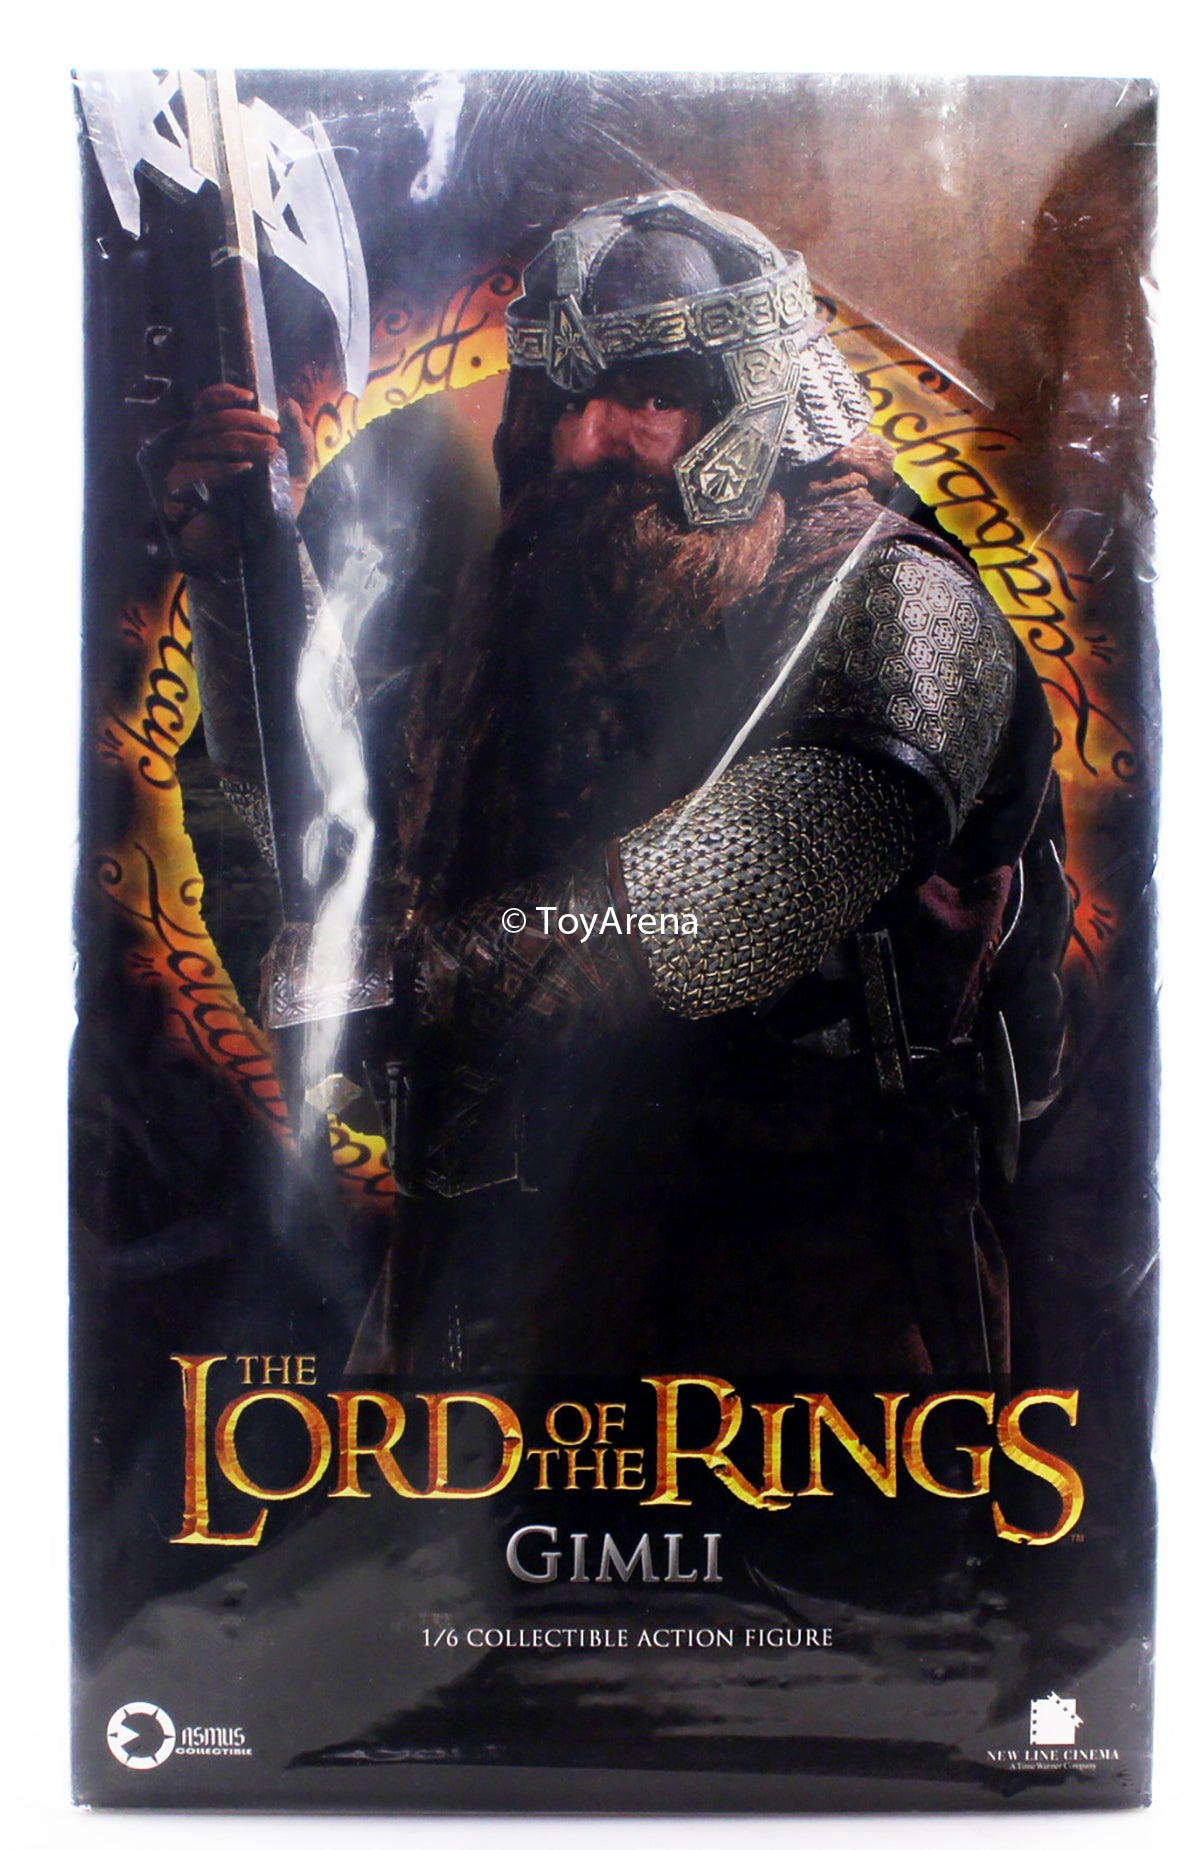 Asmus 1/6 The Lord of the Rings Series Gimli Sixth Scale Figure